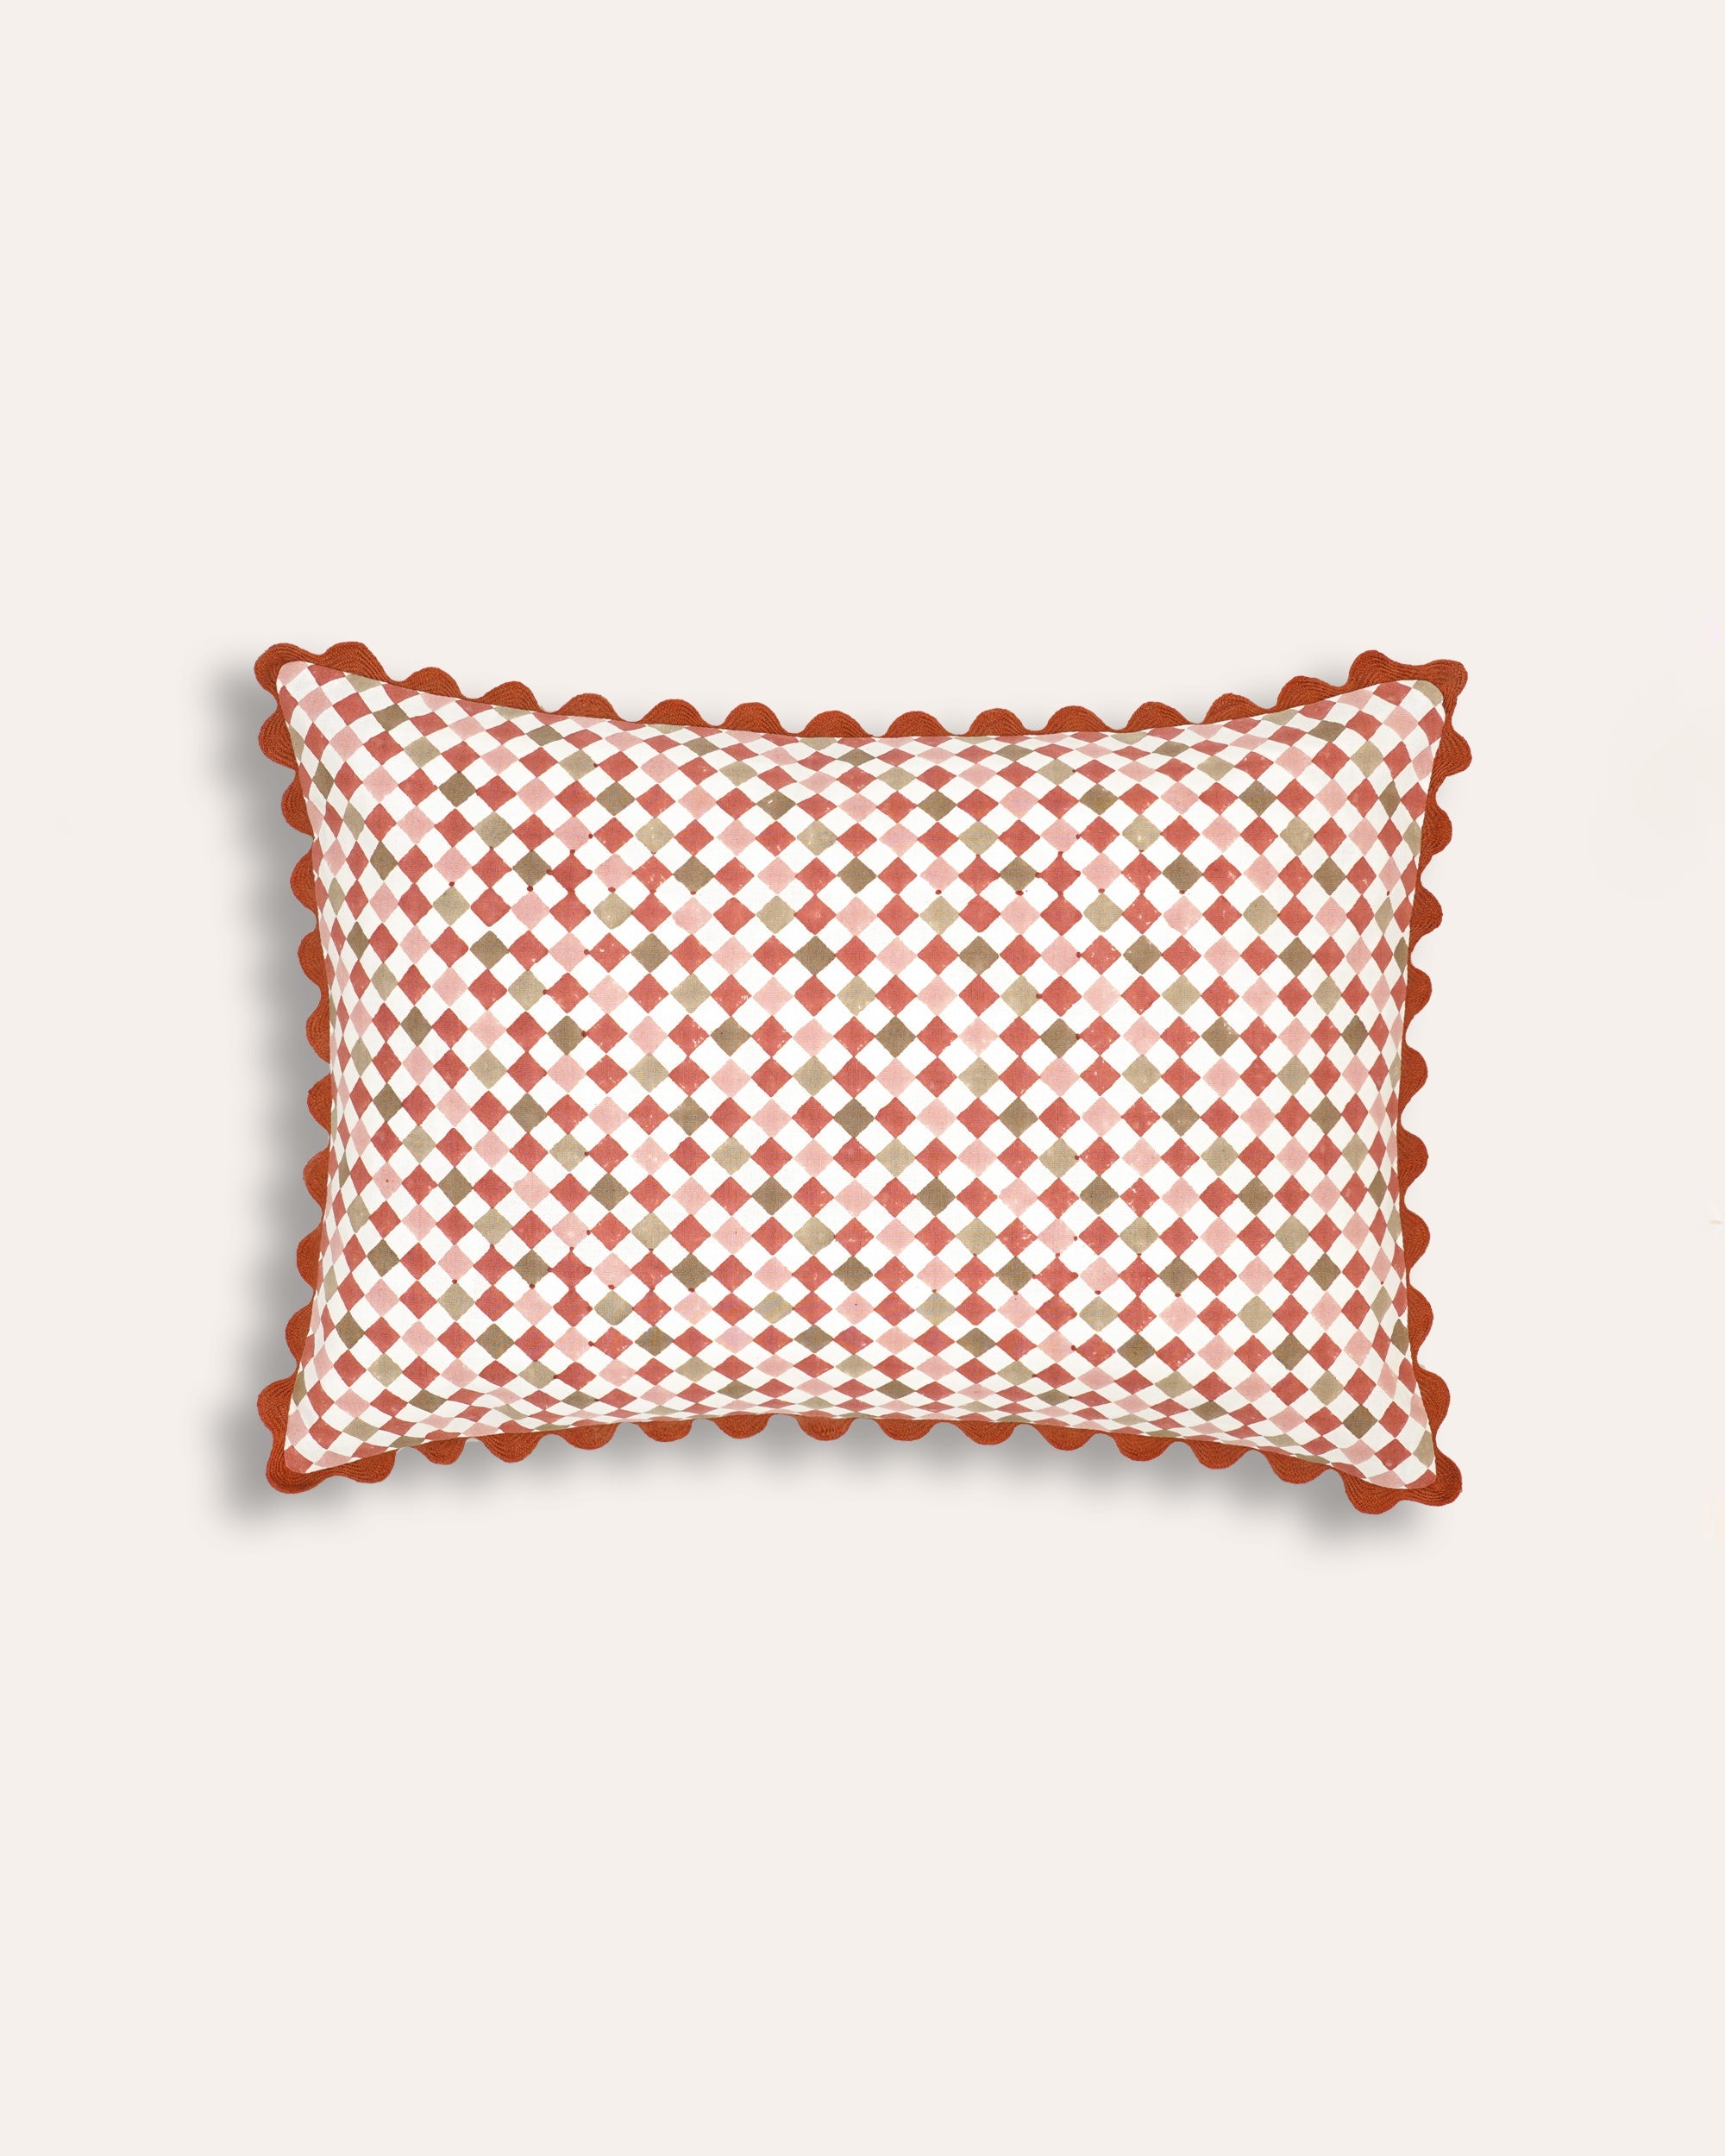 Azulejo Rectangular Block Print Cushion - Red and Taupe